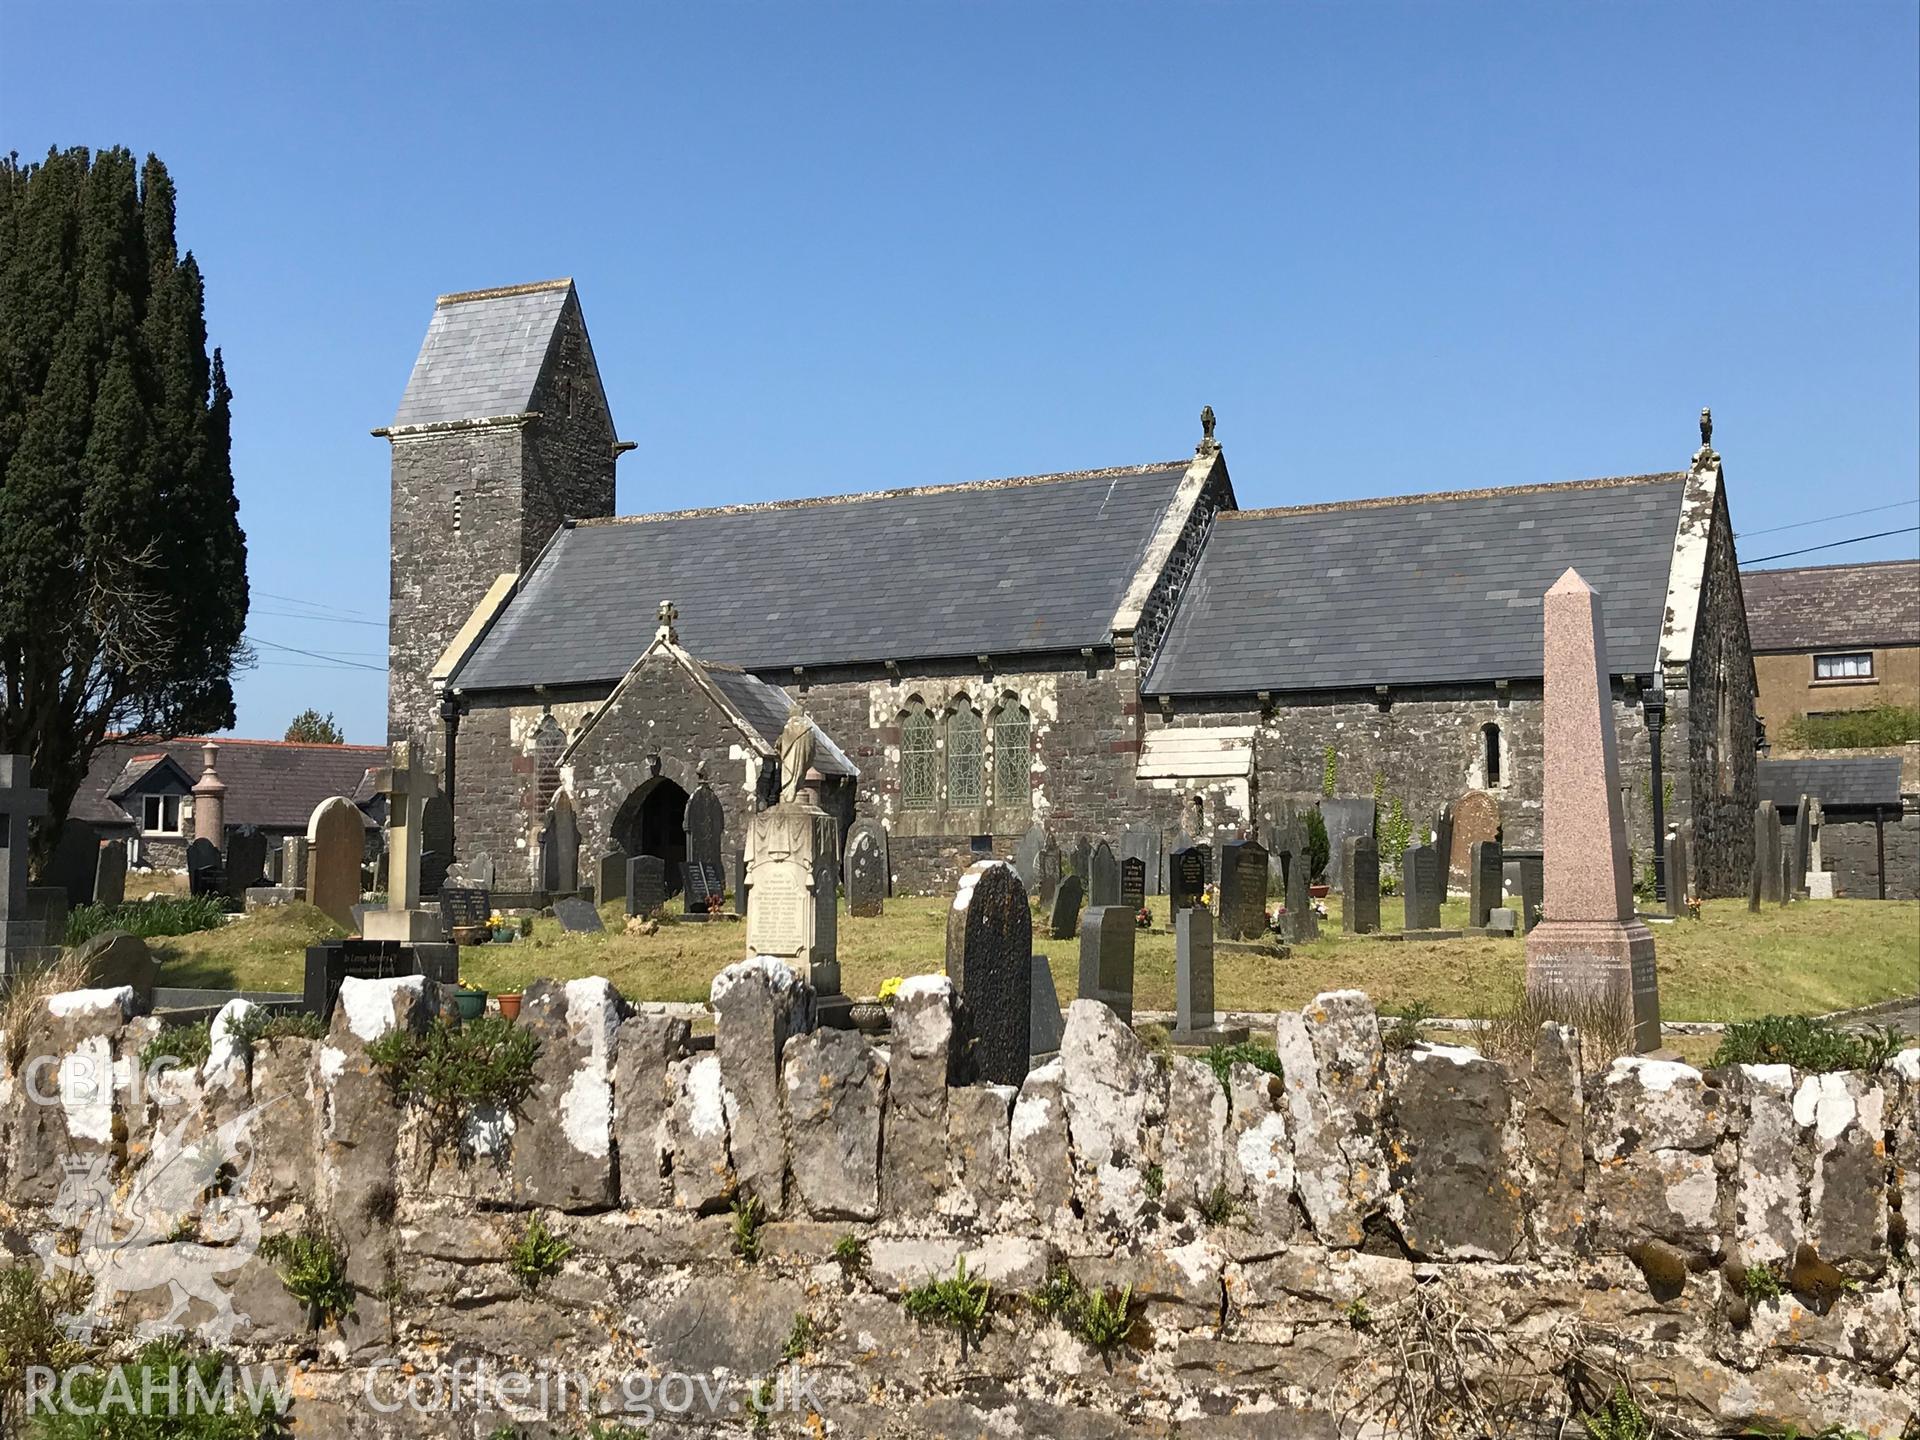 Colour photo showing exterior view of St. Margaret Marlos or St. Teilo's church and graveyard, Pendine, taken by Paul R. Davis, 6th May 2018.